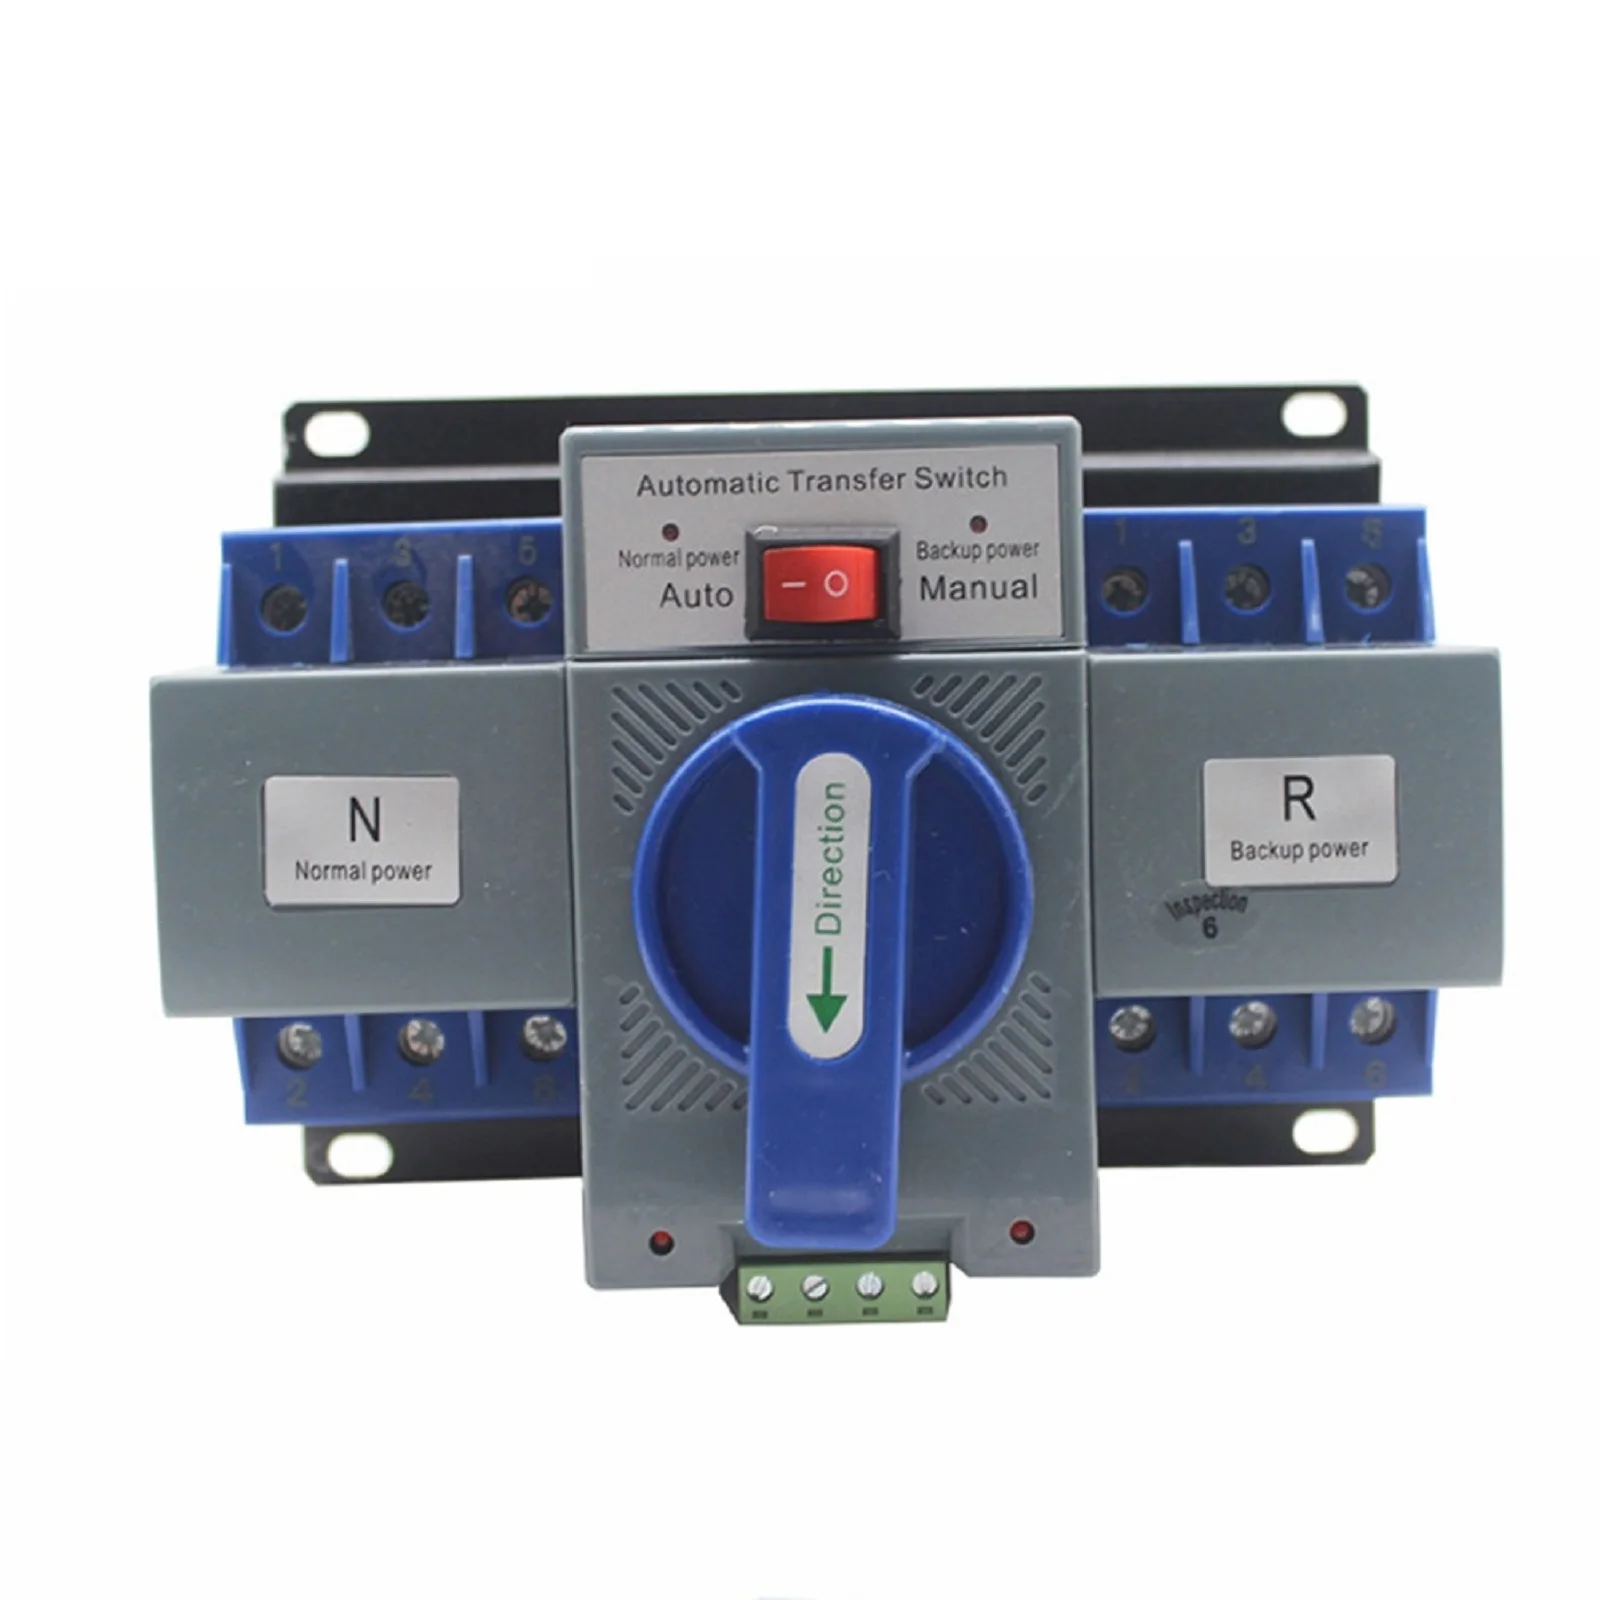 dual-power-automatic-transfer-switch-for-generator-changeover-switch-ac400v-hardware-idc-connector-electrical-testing-equipment